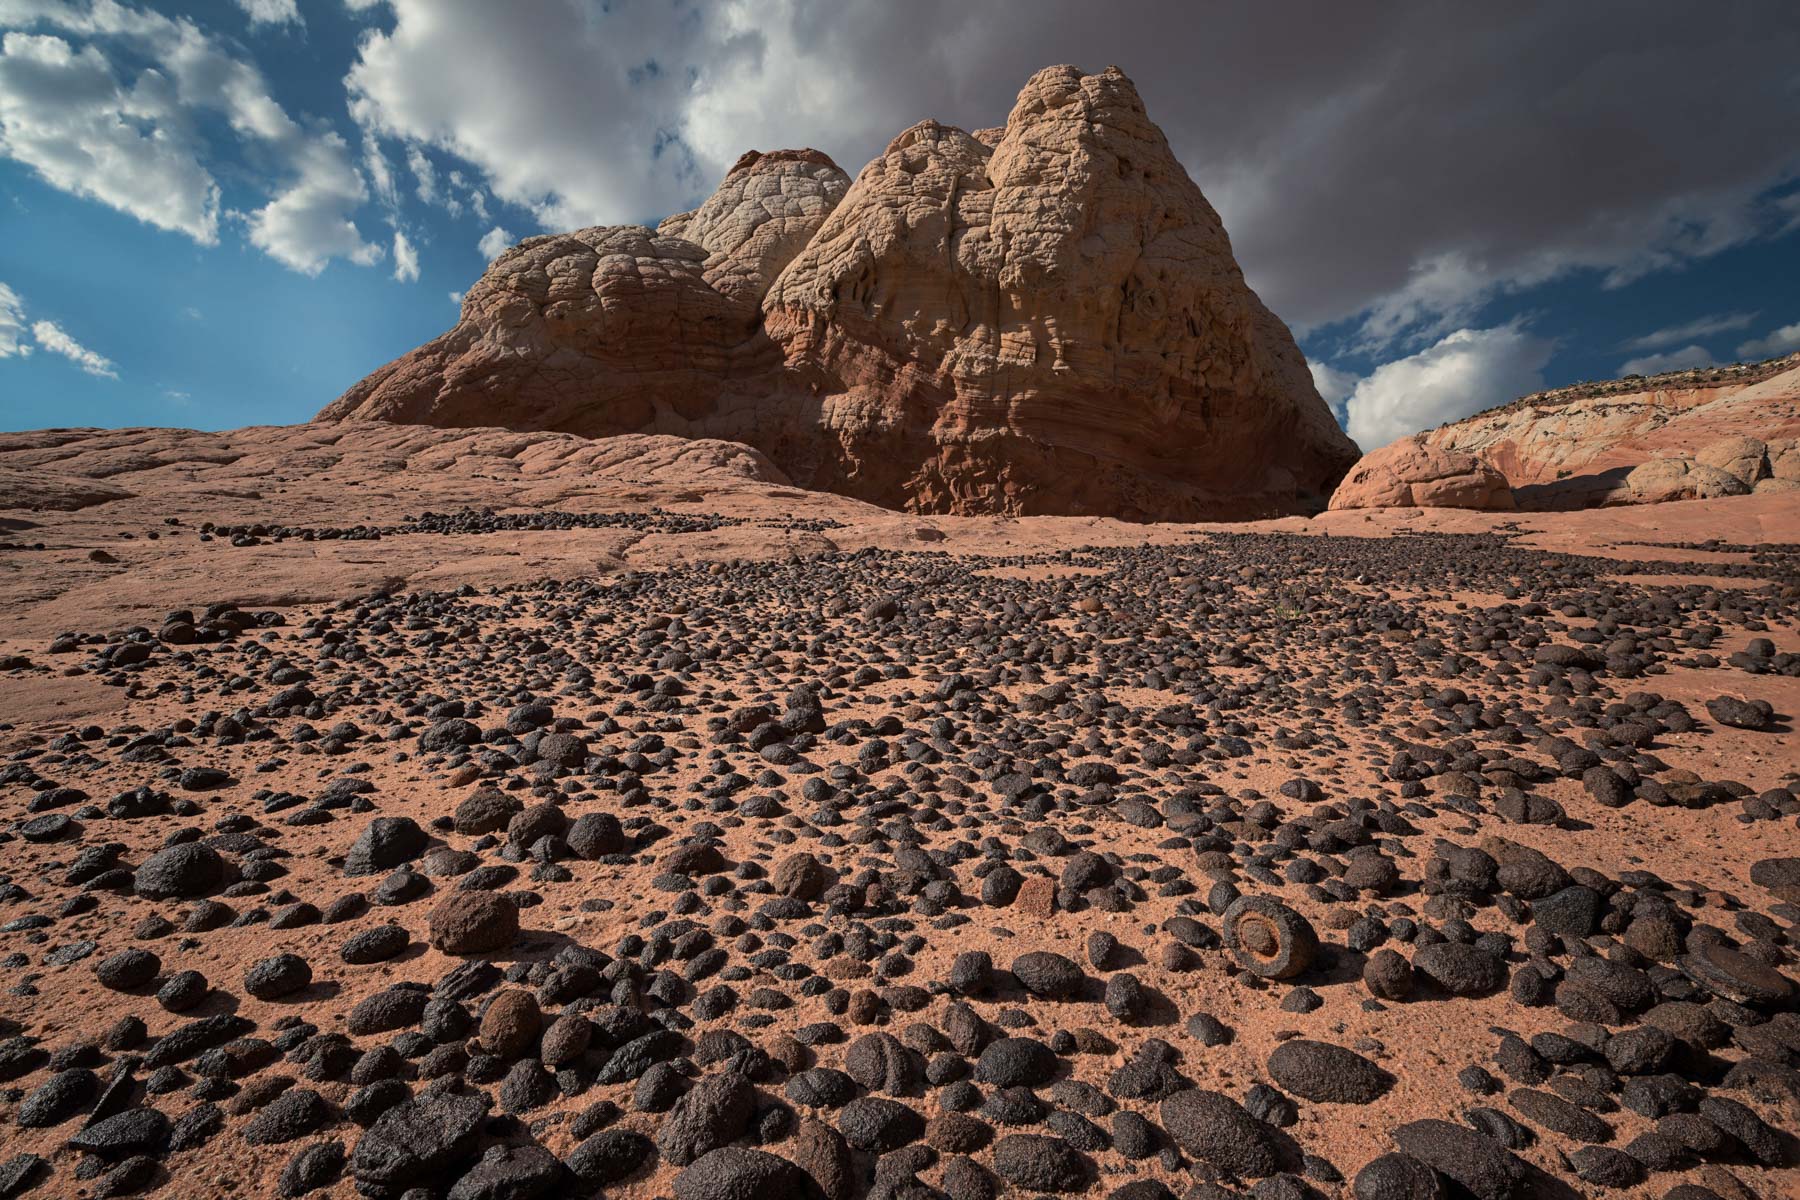 Moqui Marbles at The White Pocket in Vermilion Cliffs National Monument